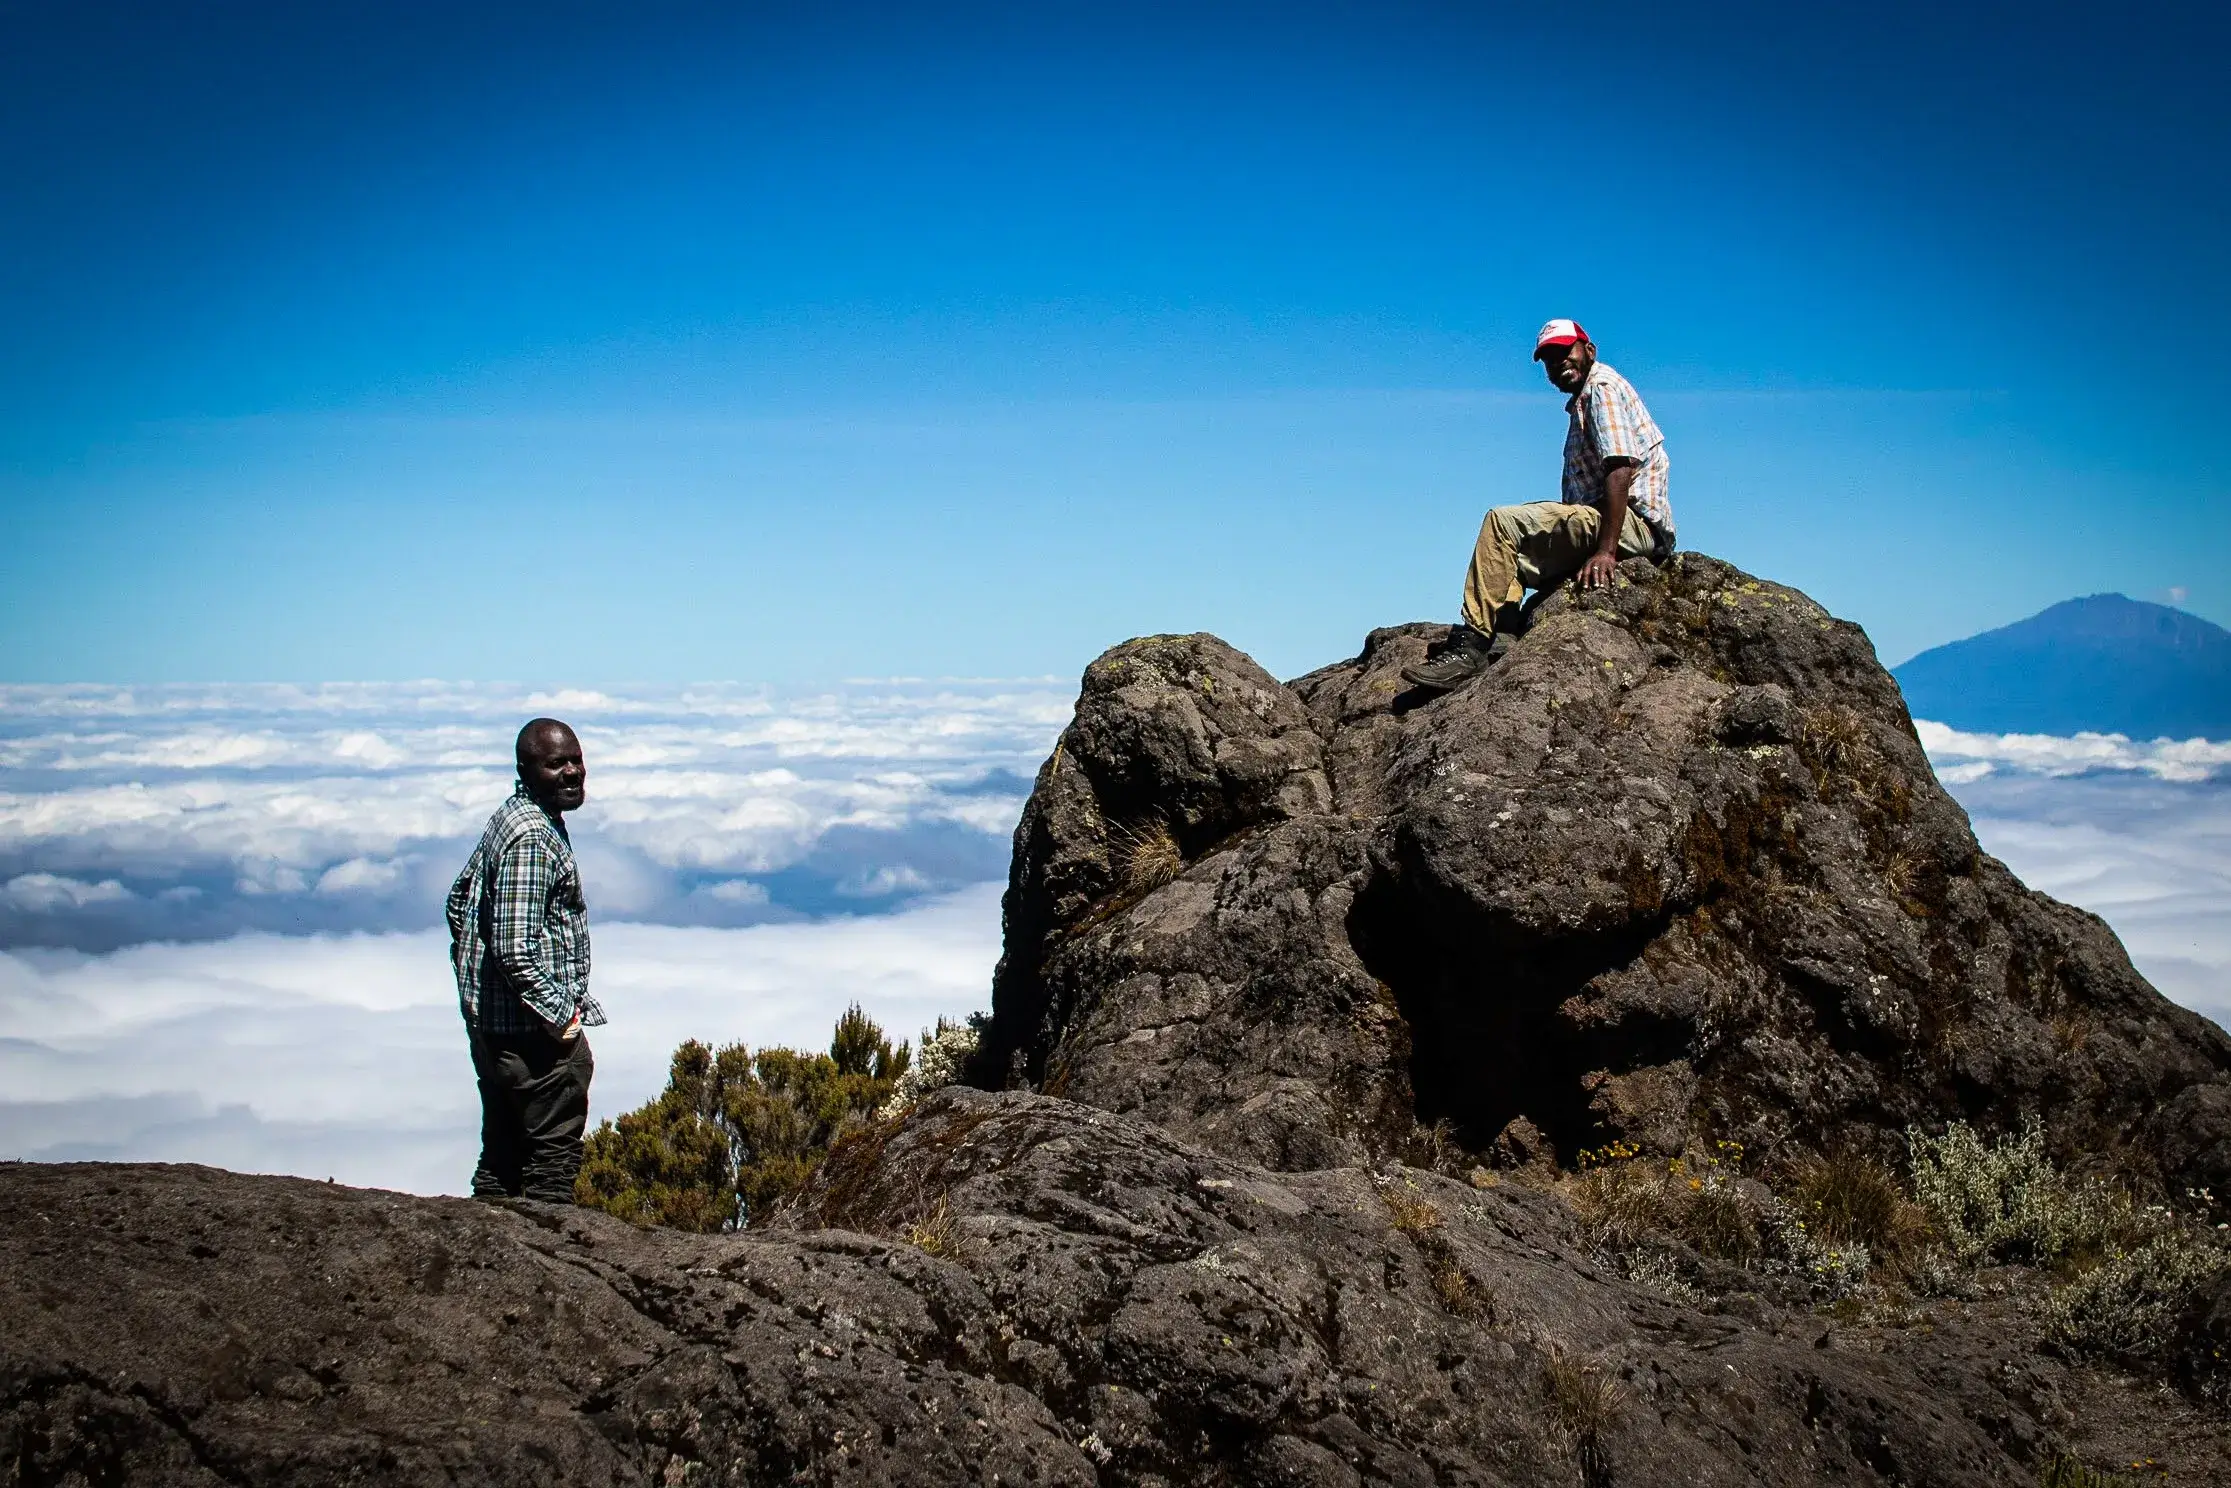 Our Adventurous travelers having moments of joy after reaching the highest point of Kilimanjaro